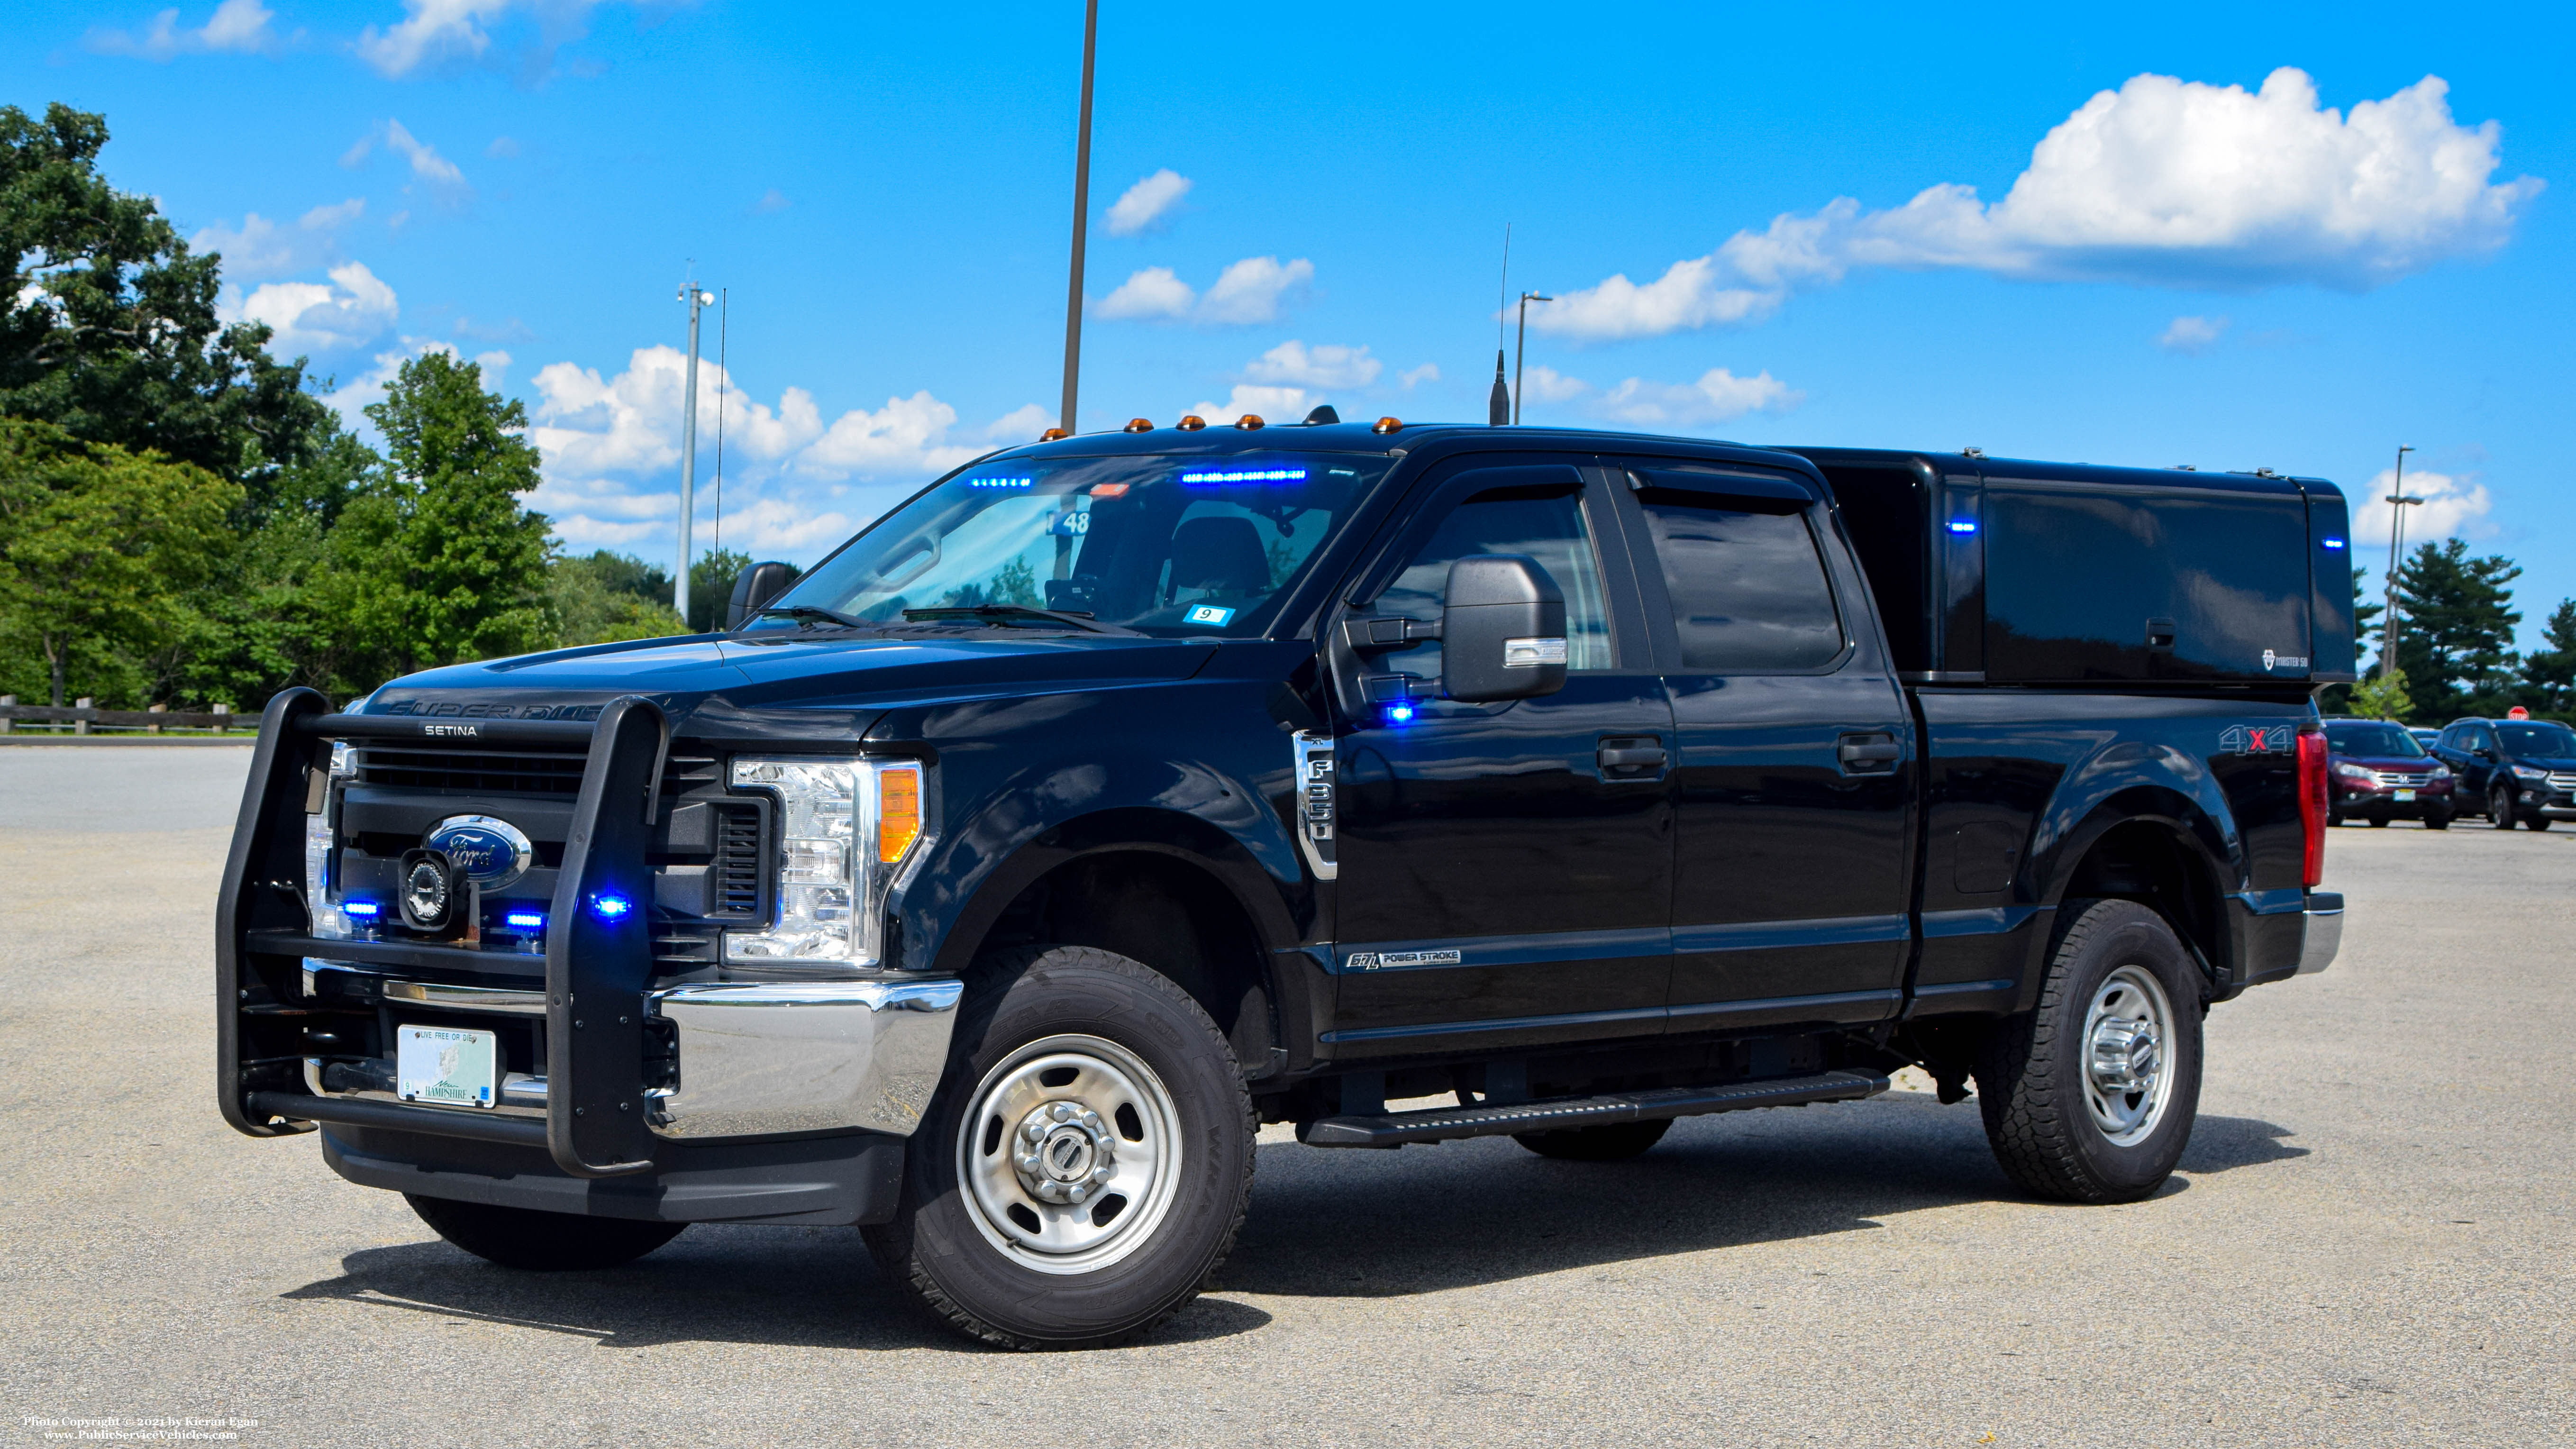 A photo  of New Hampshire State Police
            Cruiser 86, a 2017 Ford F-350 Crew Cab             taken by Kieran Egan